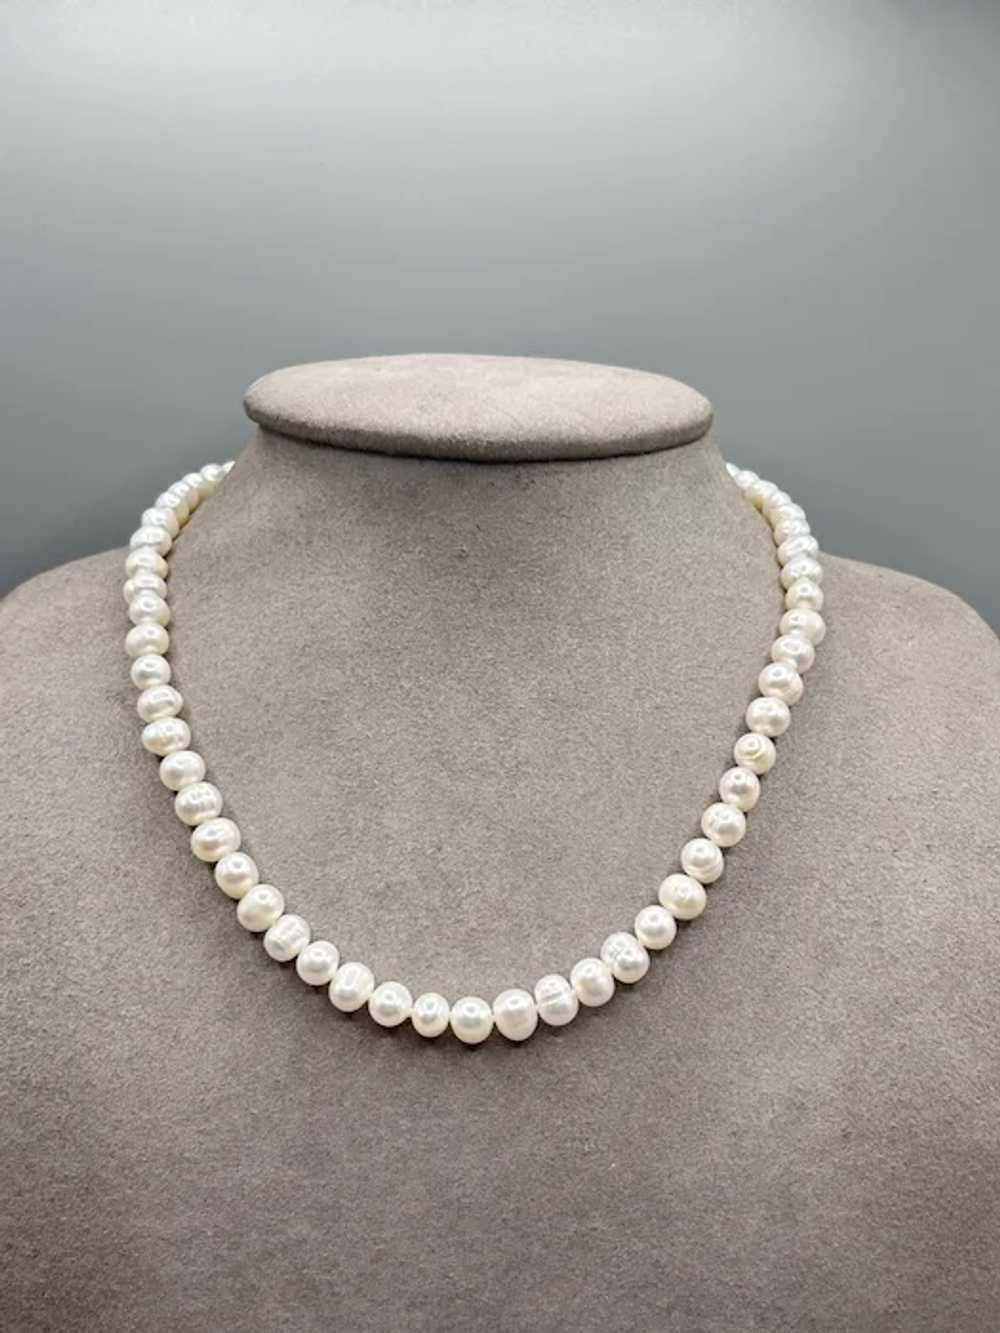 Beaded Genuine Pearls Necklace Hand Knotted Irreg… - image 2